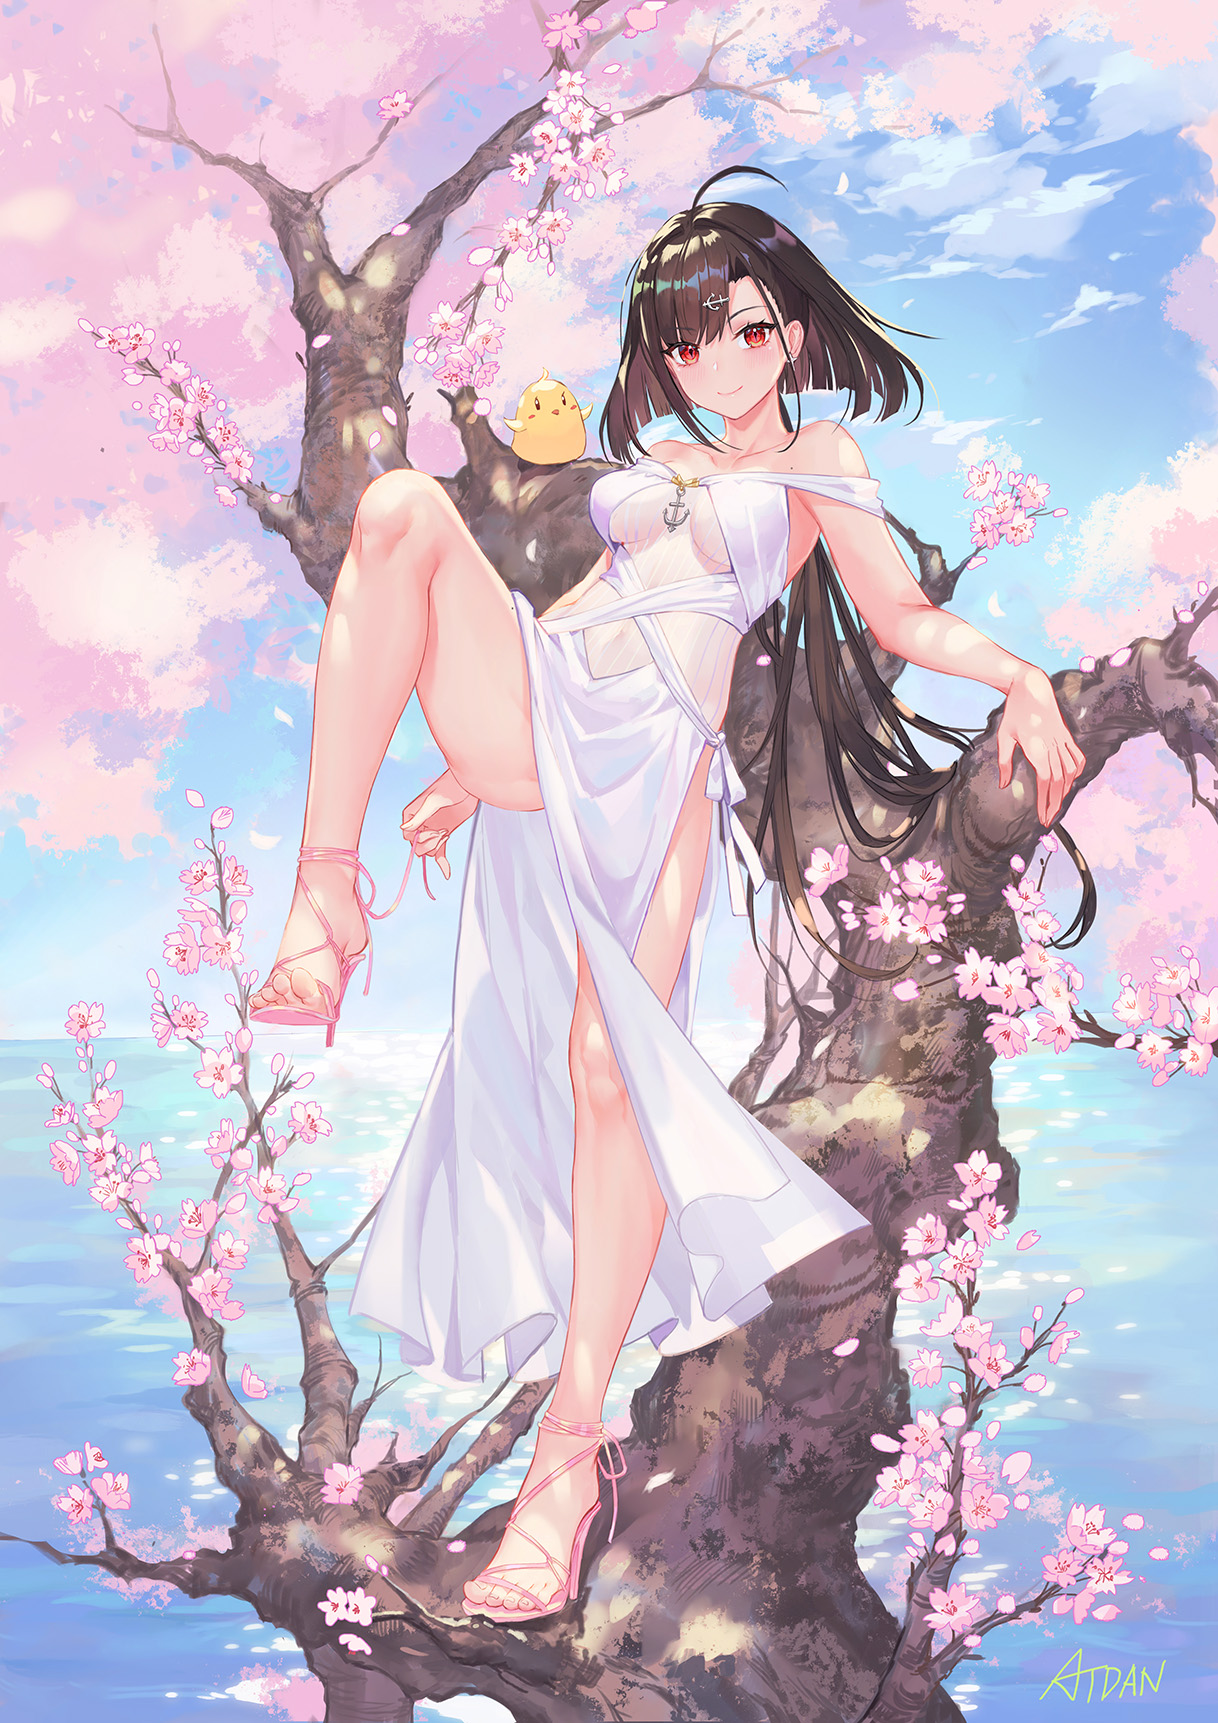 Anime 1218x1723 Independence (Azur Lane) Azur Lane video games anime girls video game girls brunette long hair hairpins red eyes smiling looking at viewer see-through clothing dress white dress trees heels cherry blossom spring sky clouds artwork 2D digital art drawing fan art Atdan